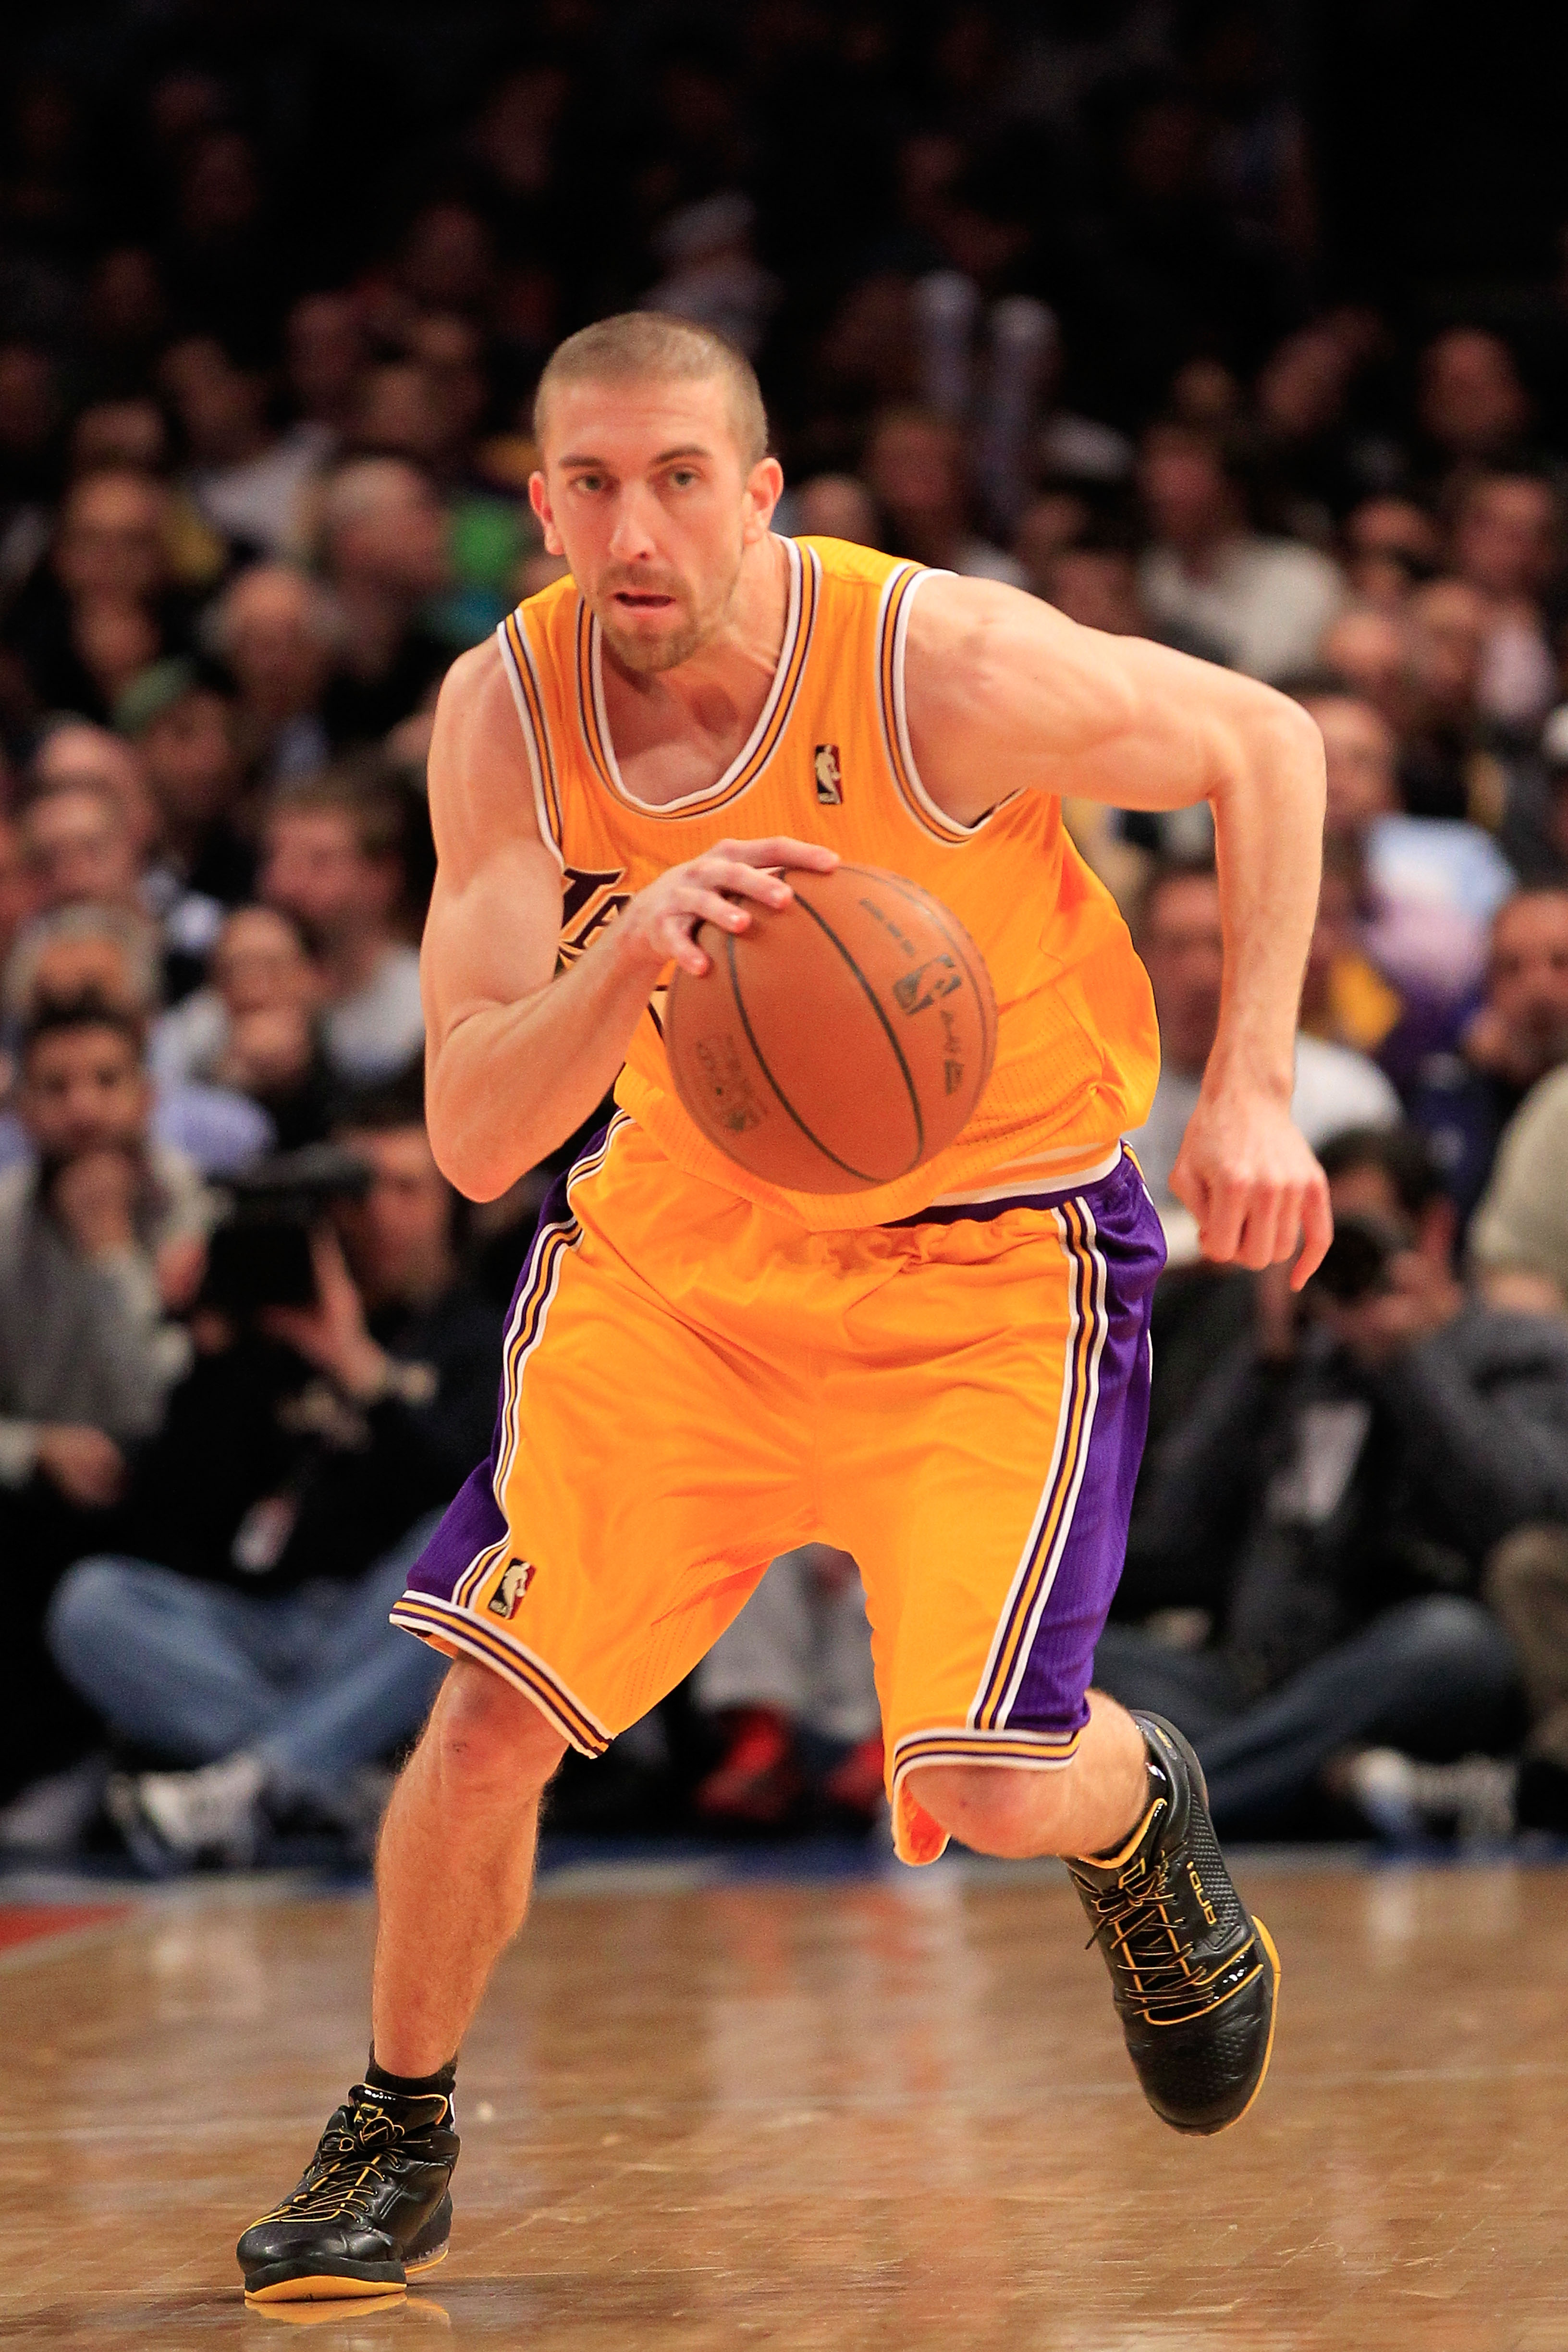 NEW YORK, NY - FEBRUARY 11:  Steve Blake #5 of the Los Angeles Lakers dribbles the ball against the New York Knicks at Madison Square Garden on February 11, 2011 in New York City. NOTE TO USER: User expressly acknowledges and agrees that, by downloading a